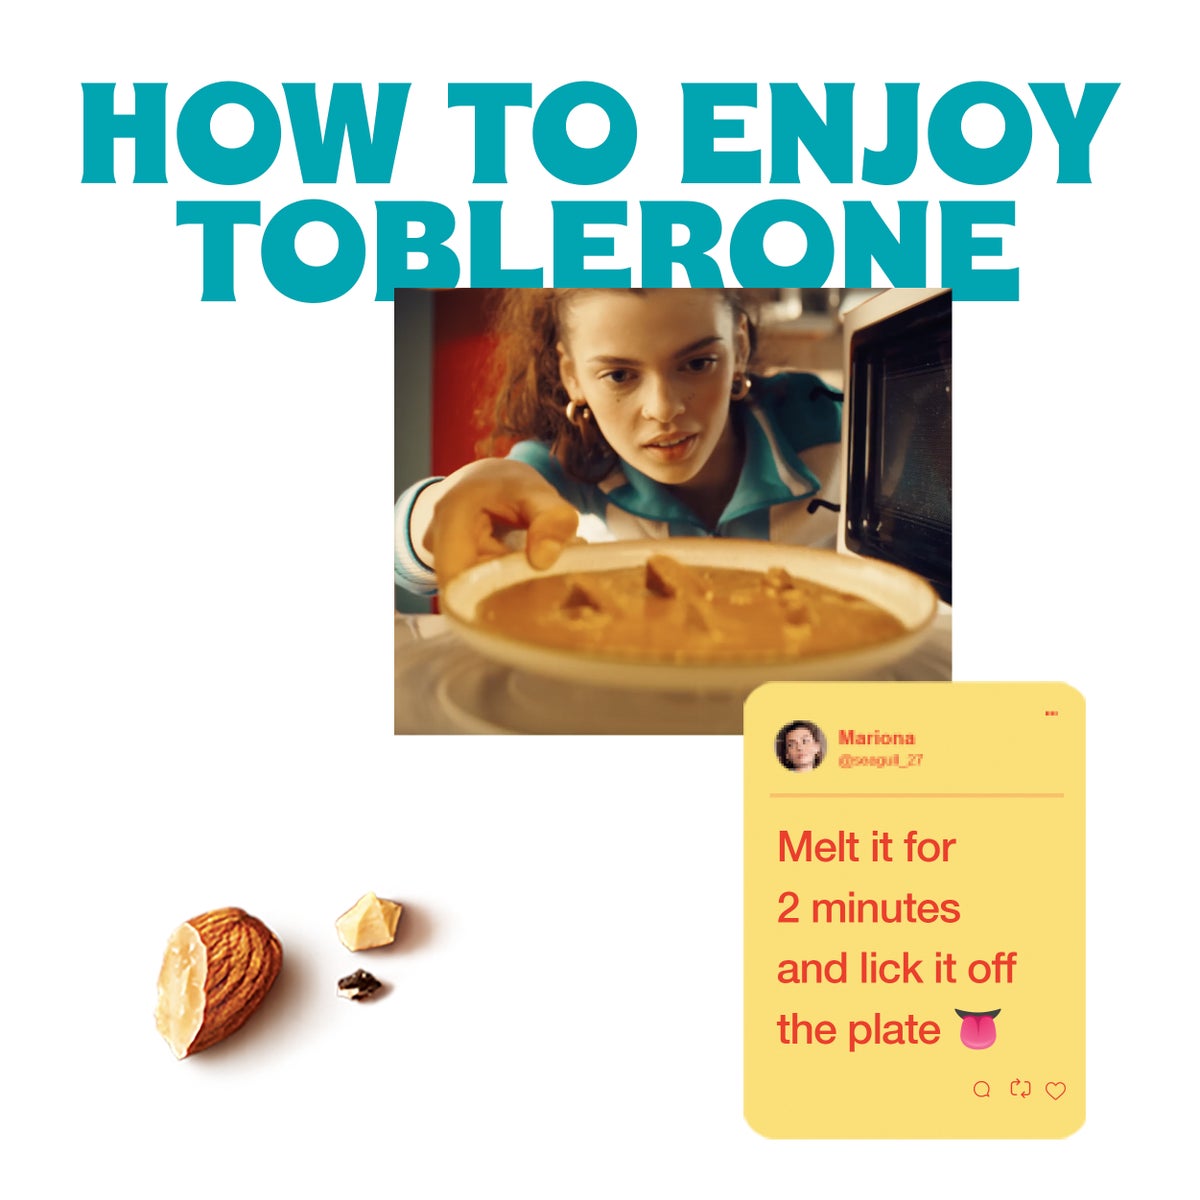 How To Enjoy Toblerone. Melt it for 2 minutes and lick it off the plate.